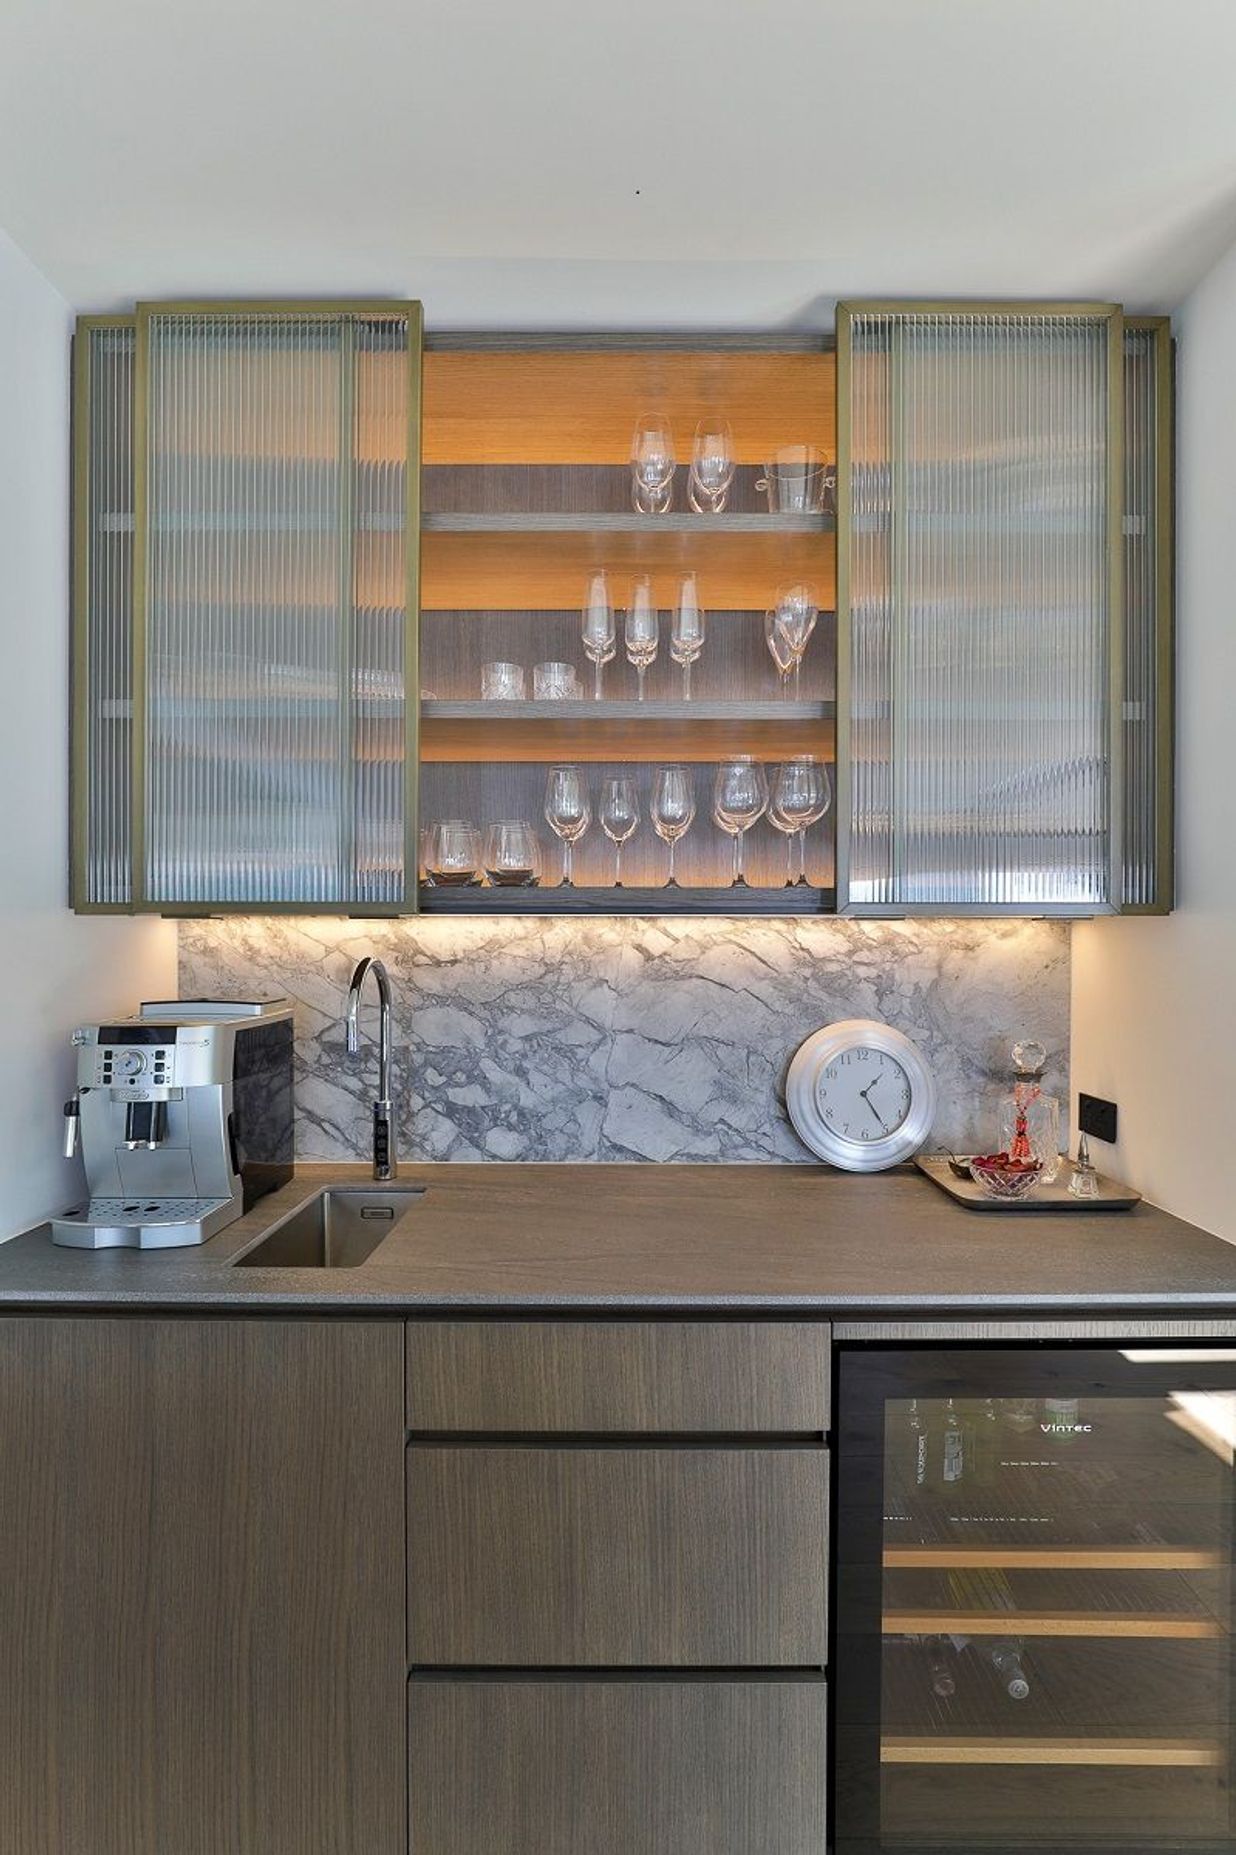 This narrow-reeded glass cabinetry by Hewe Architectural Cabinetry elevates this bar and subtly conceals the items within.